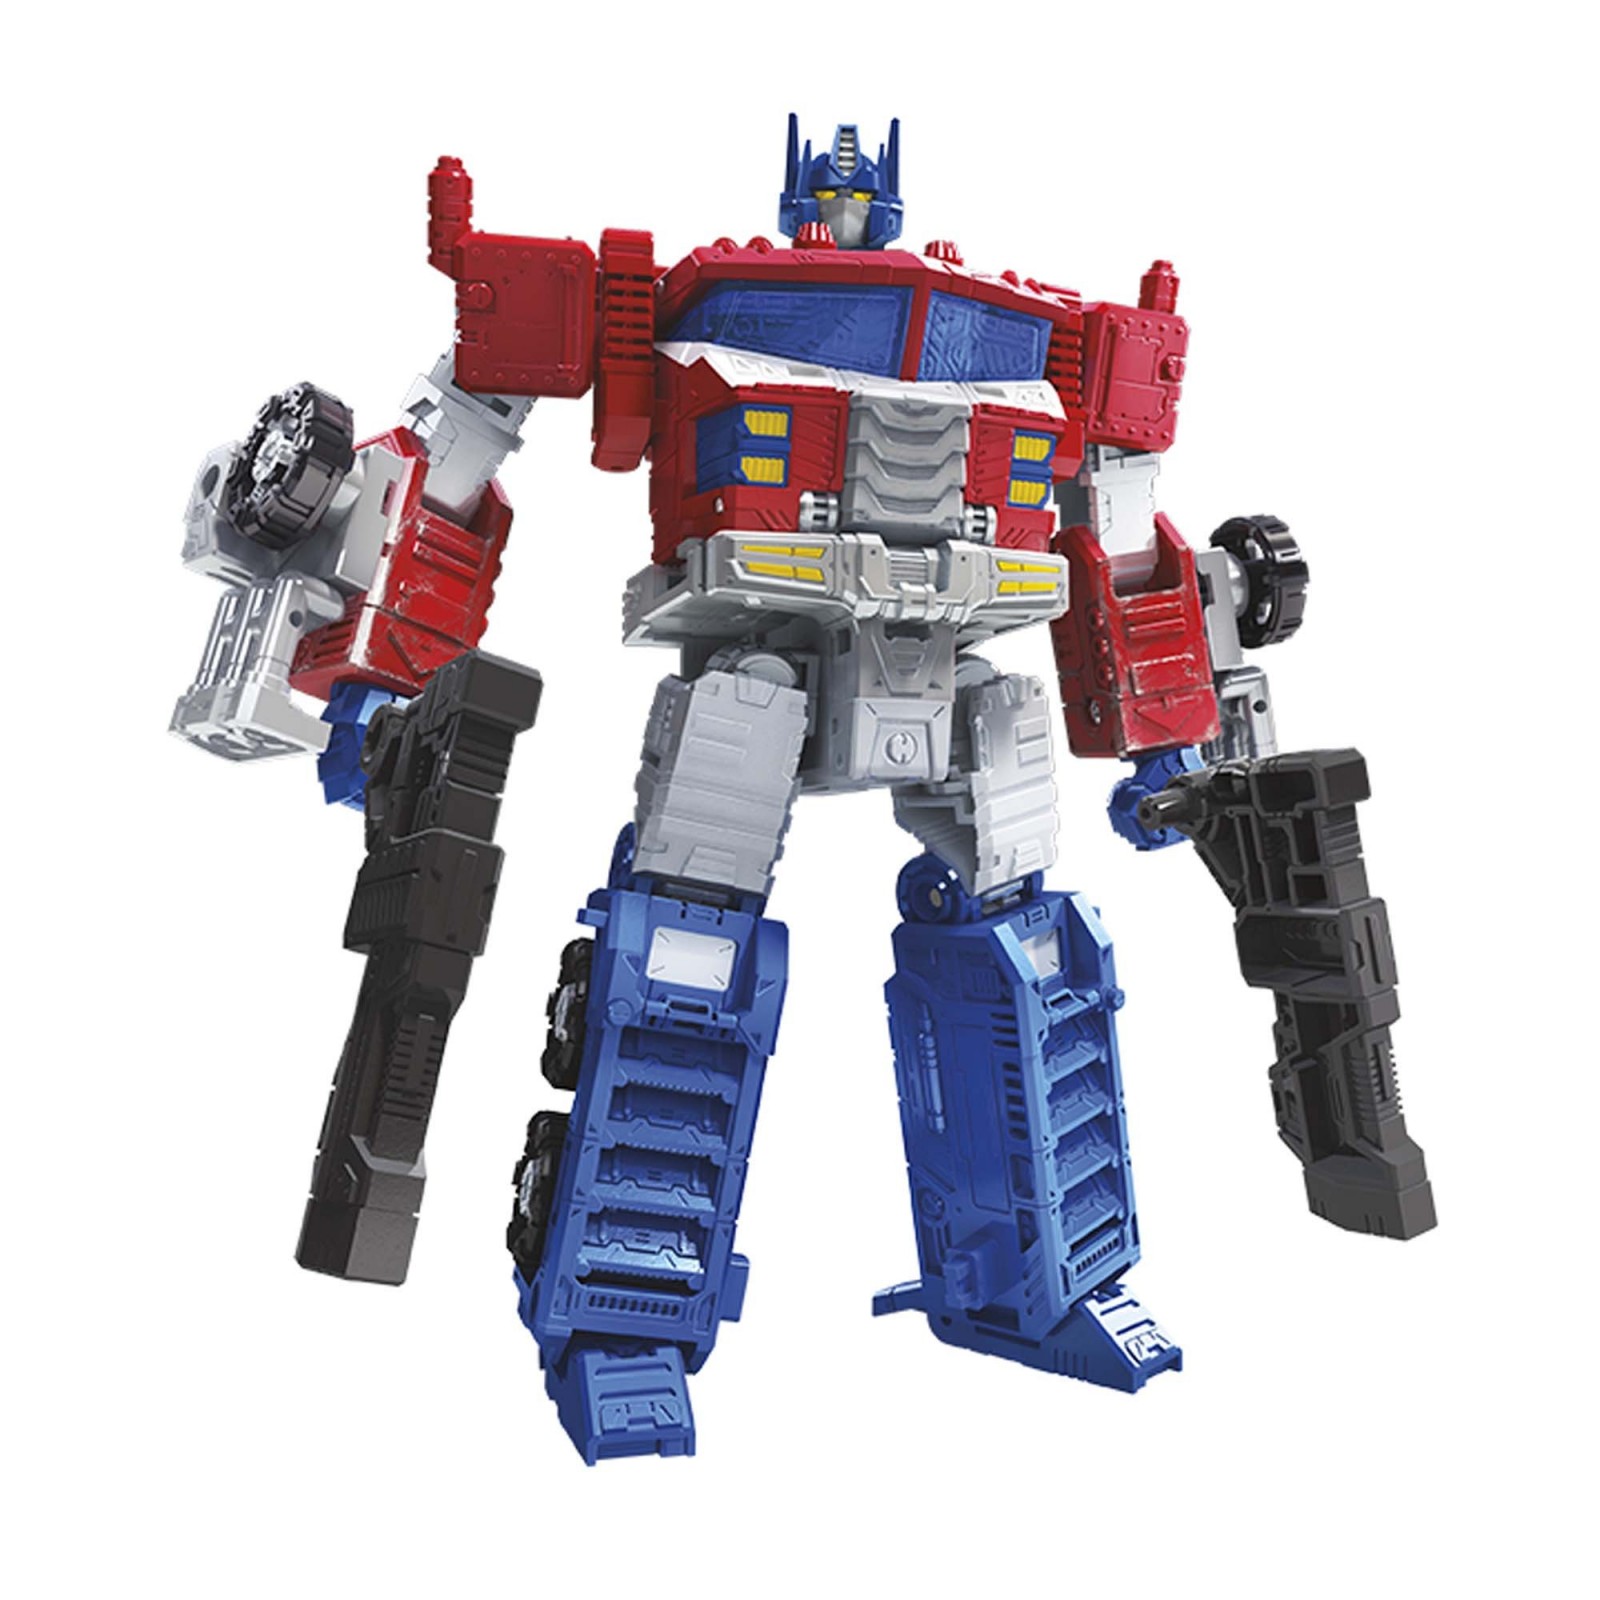 Transformers News: First look at Siege Springer, Thundercracker, and Red Alert from Walmart